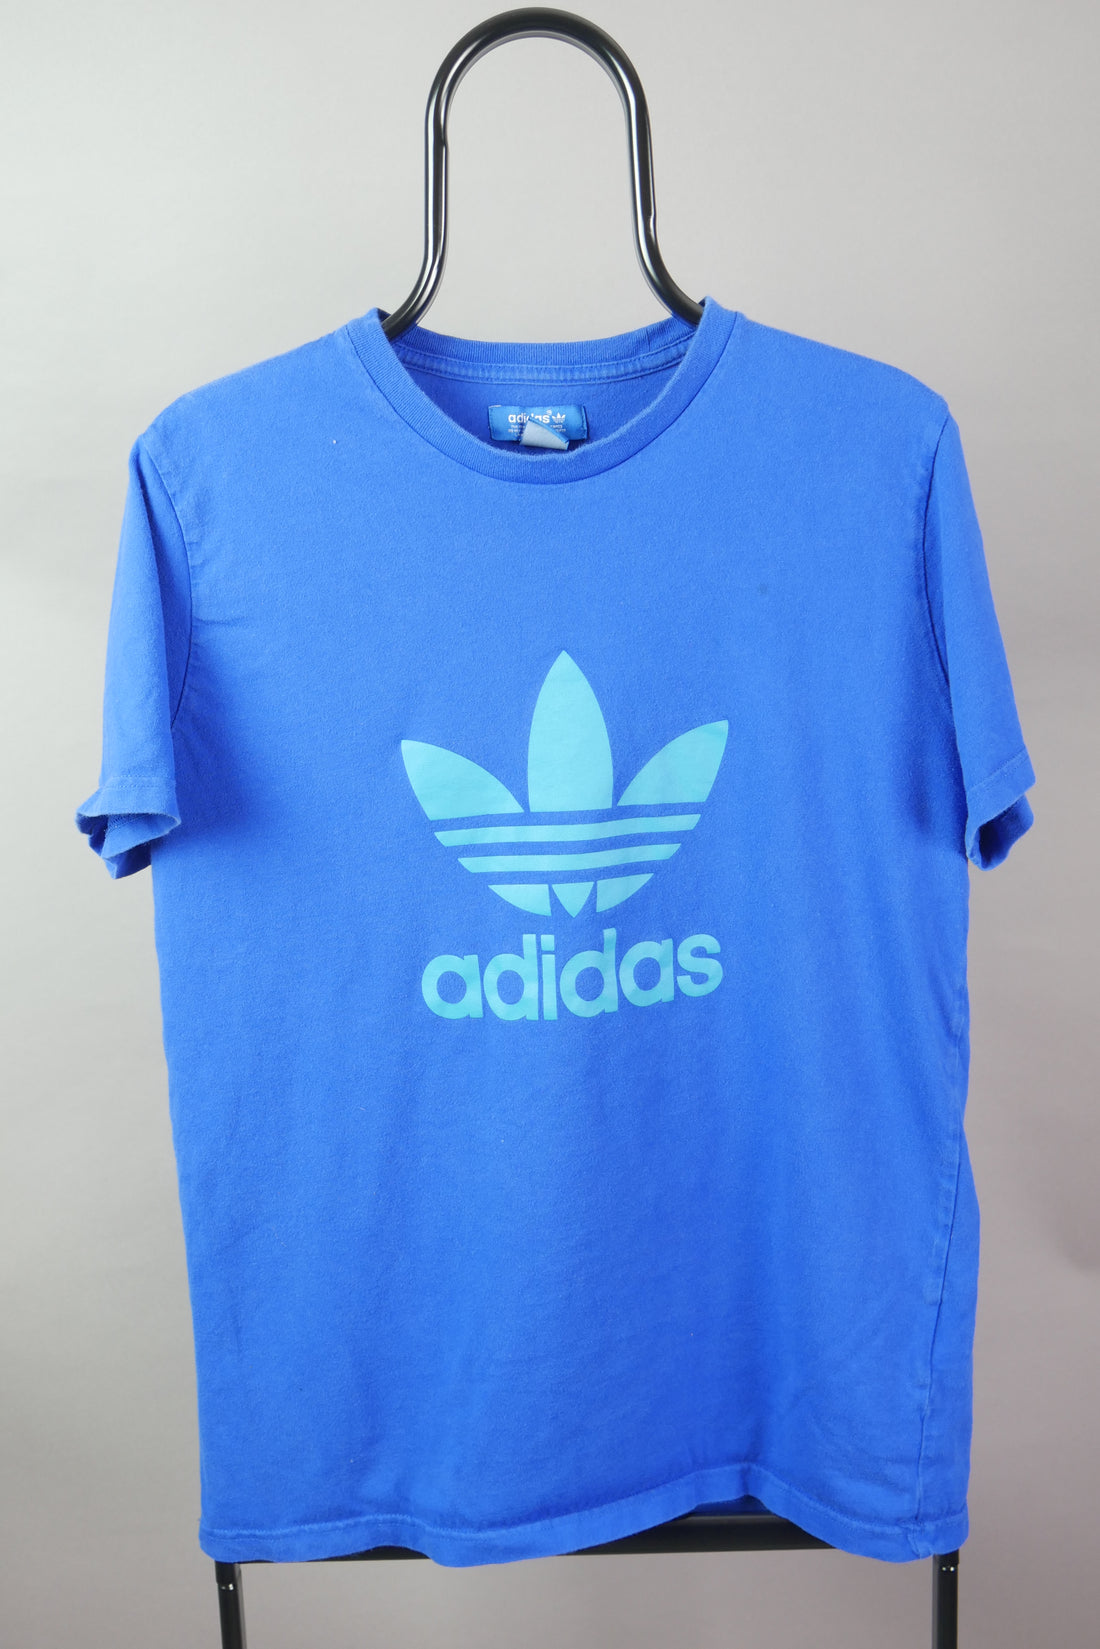 The Adidas Graphic T-Shirt (L)